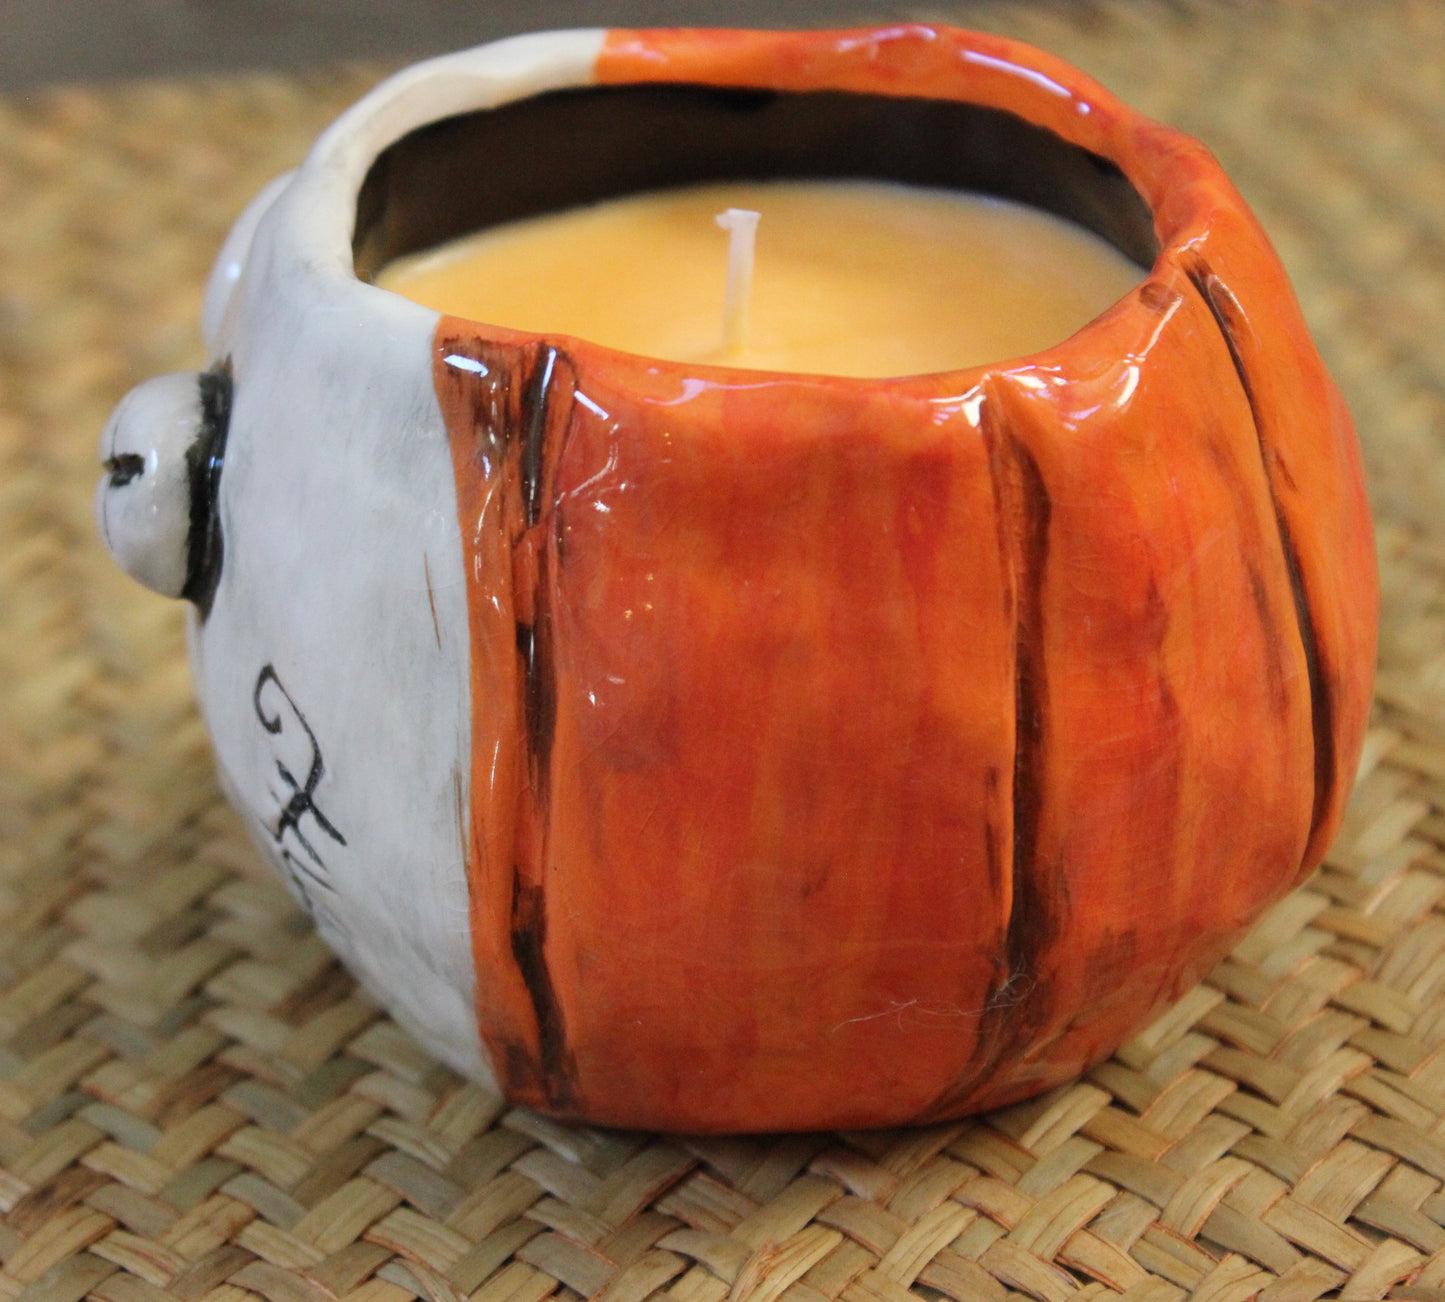 Burtonesque Pumpkin Scented Candle and Holder